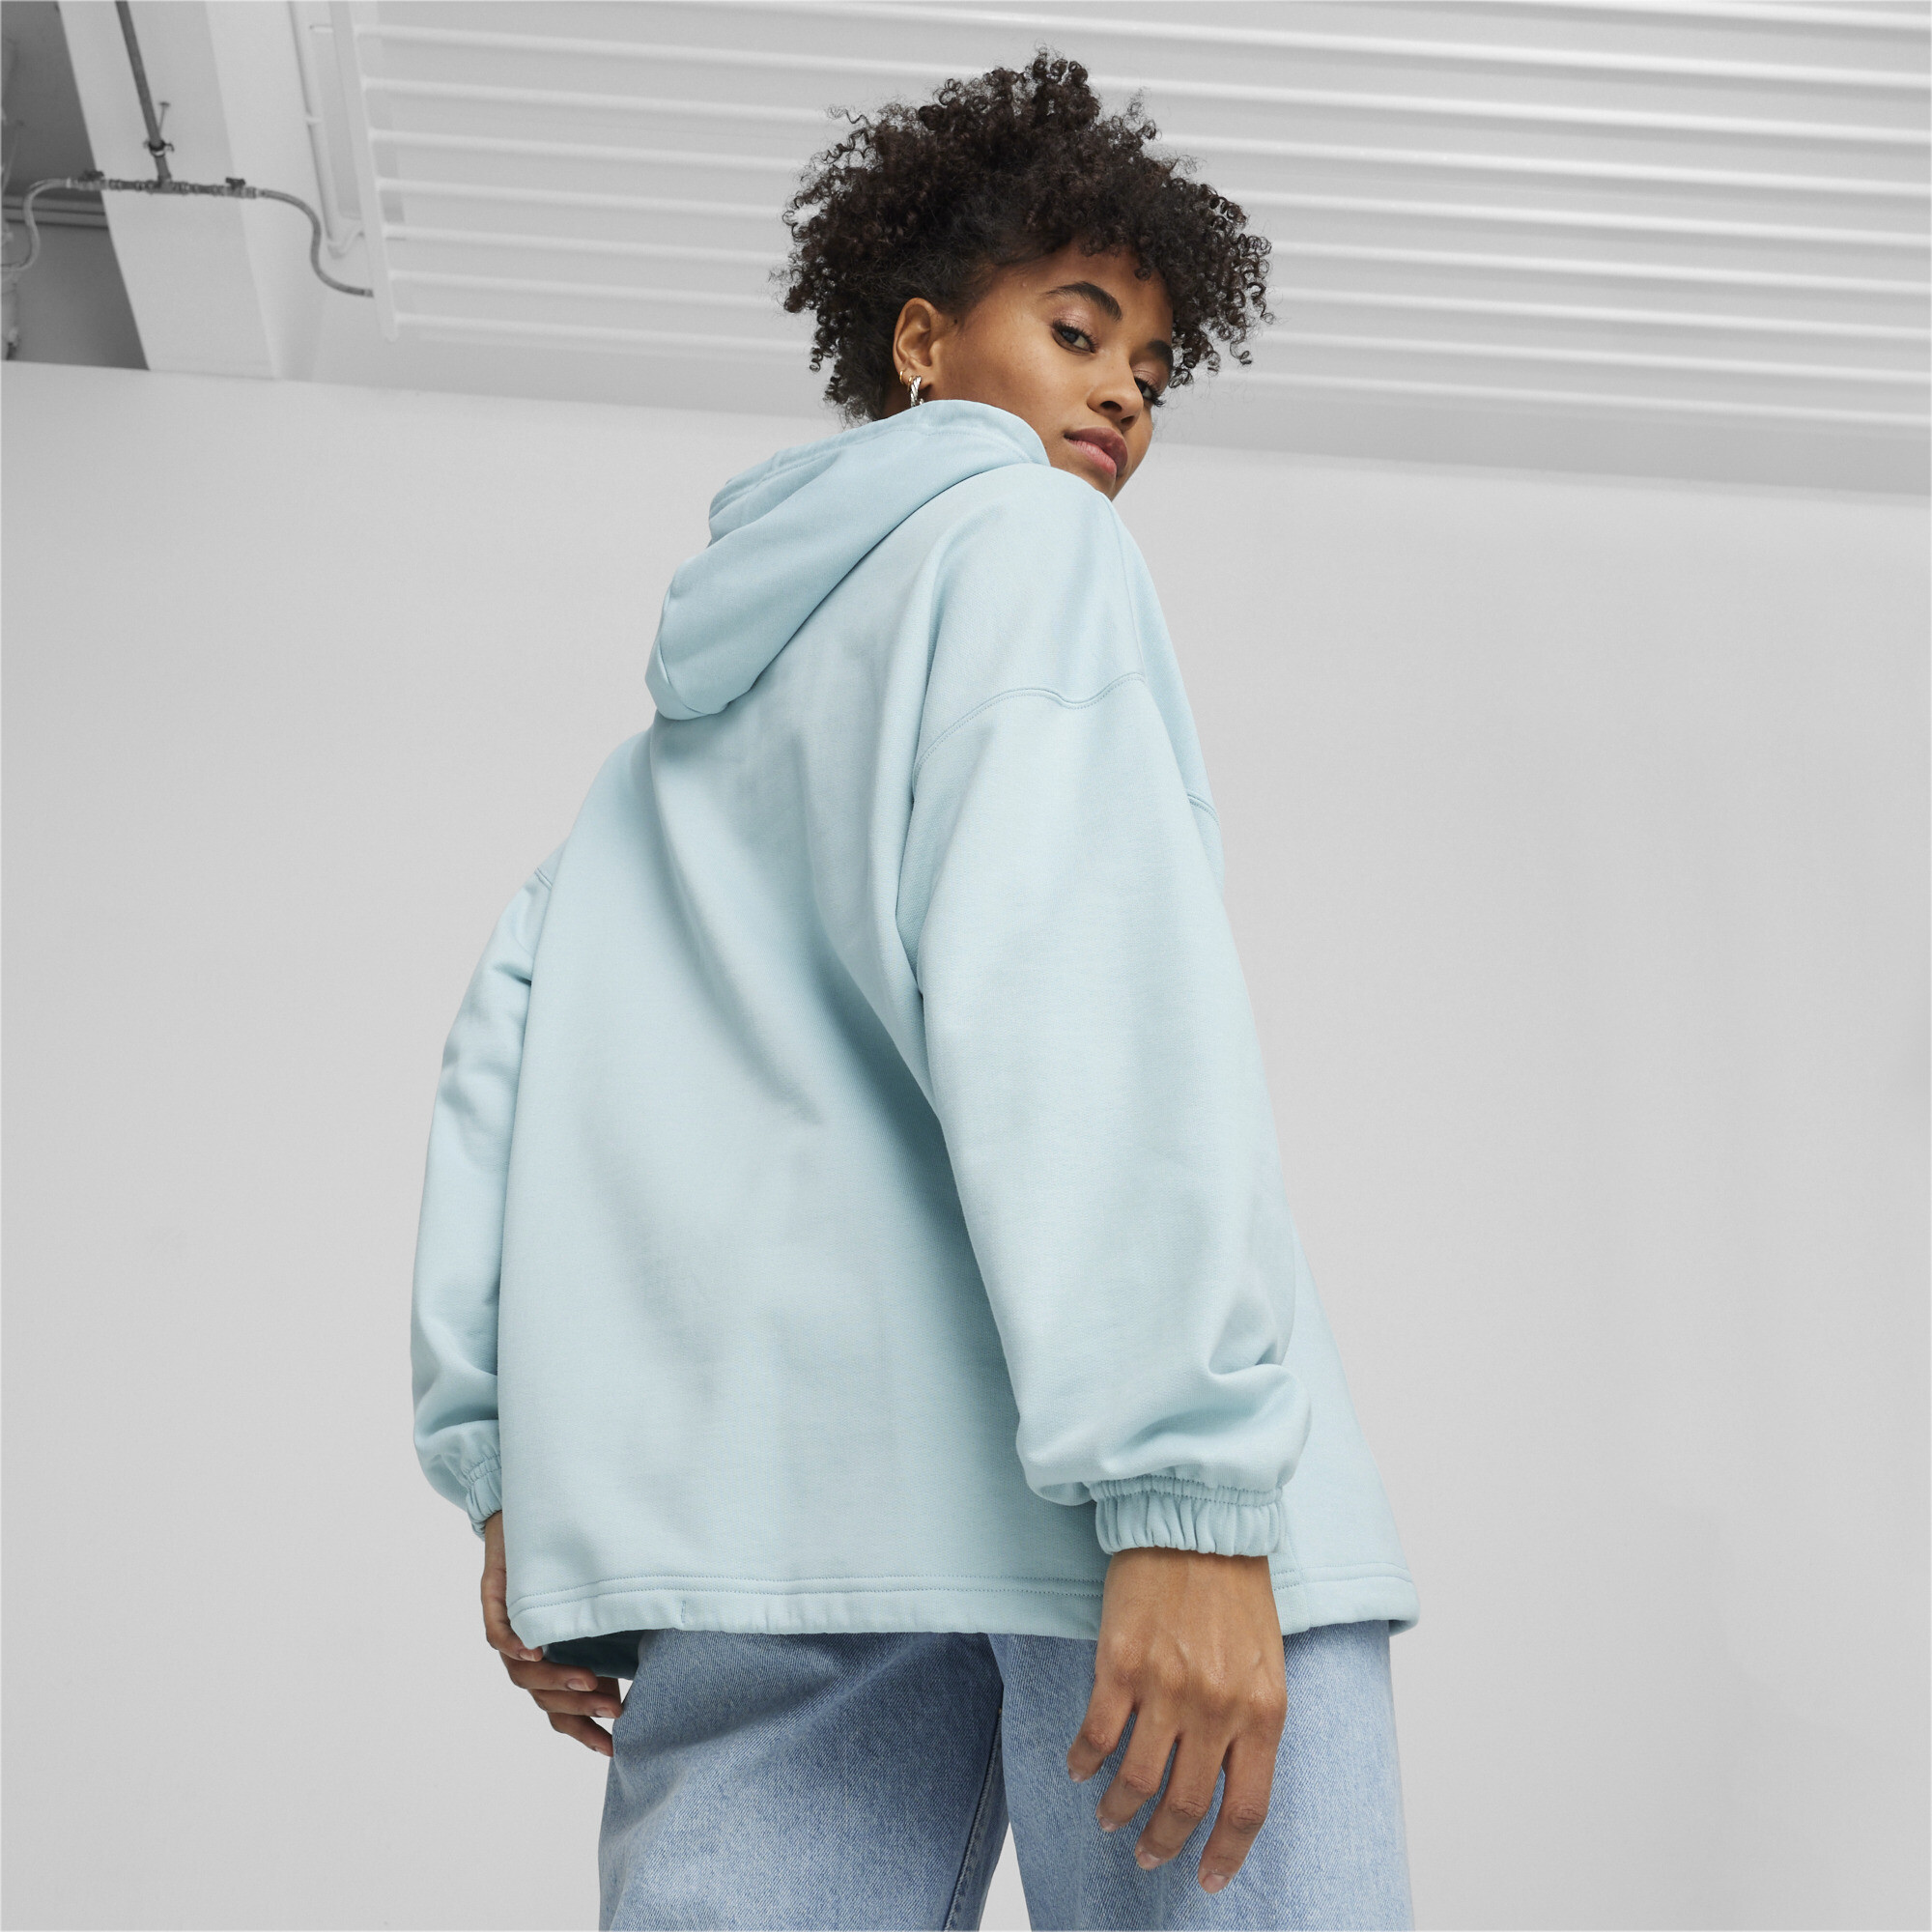 Women's PUMA DARE TO Oversized Hoodie In Blue, Size XS